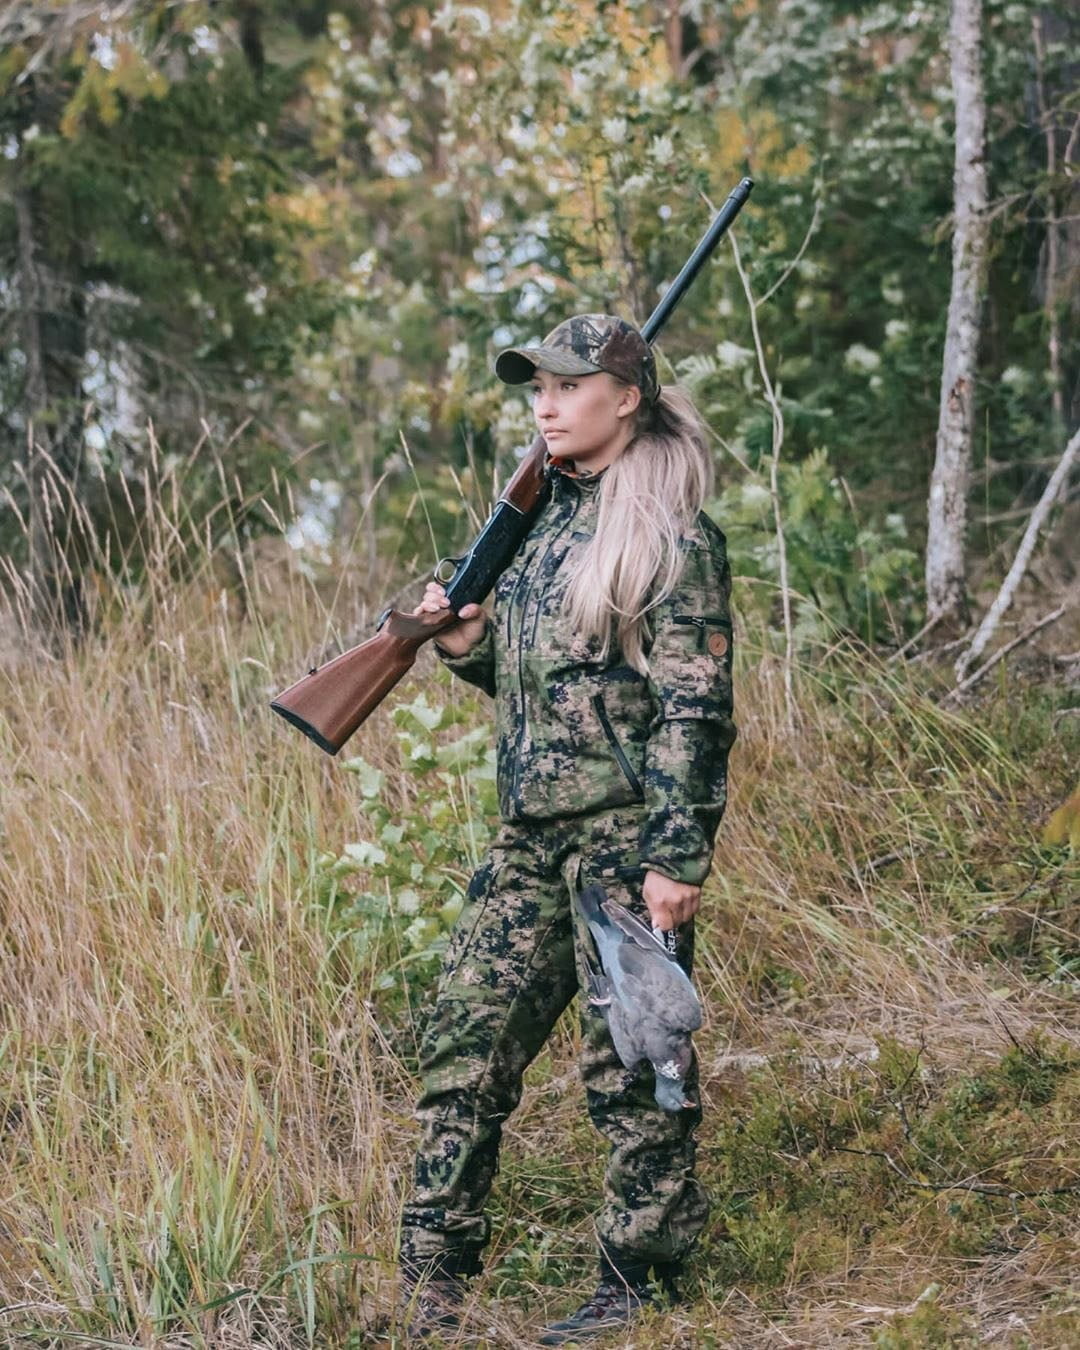 Karelia Dark xFade hunting jacket on a female model in the forest